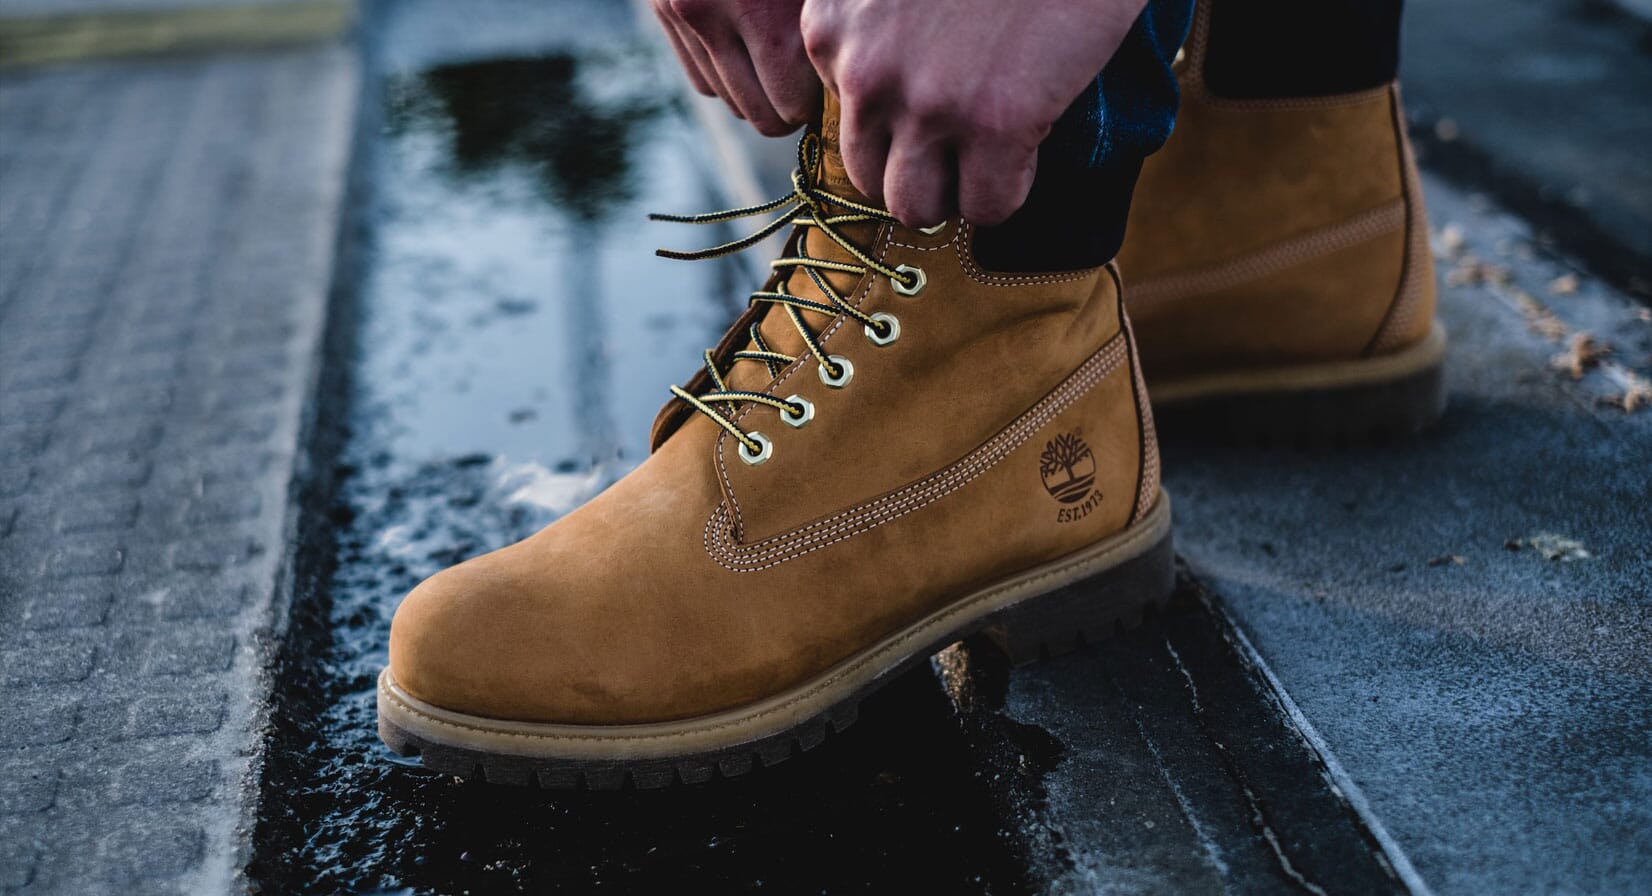 Zenuw kompas of Timberland sizing guide: Find your fit | OPUMO Magazine